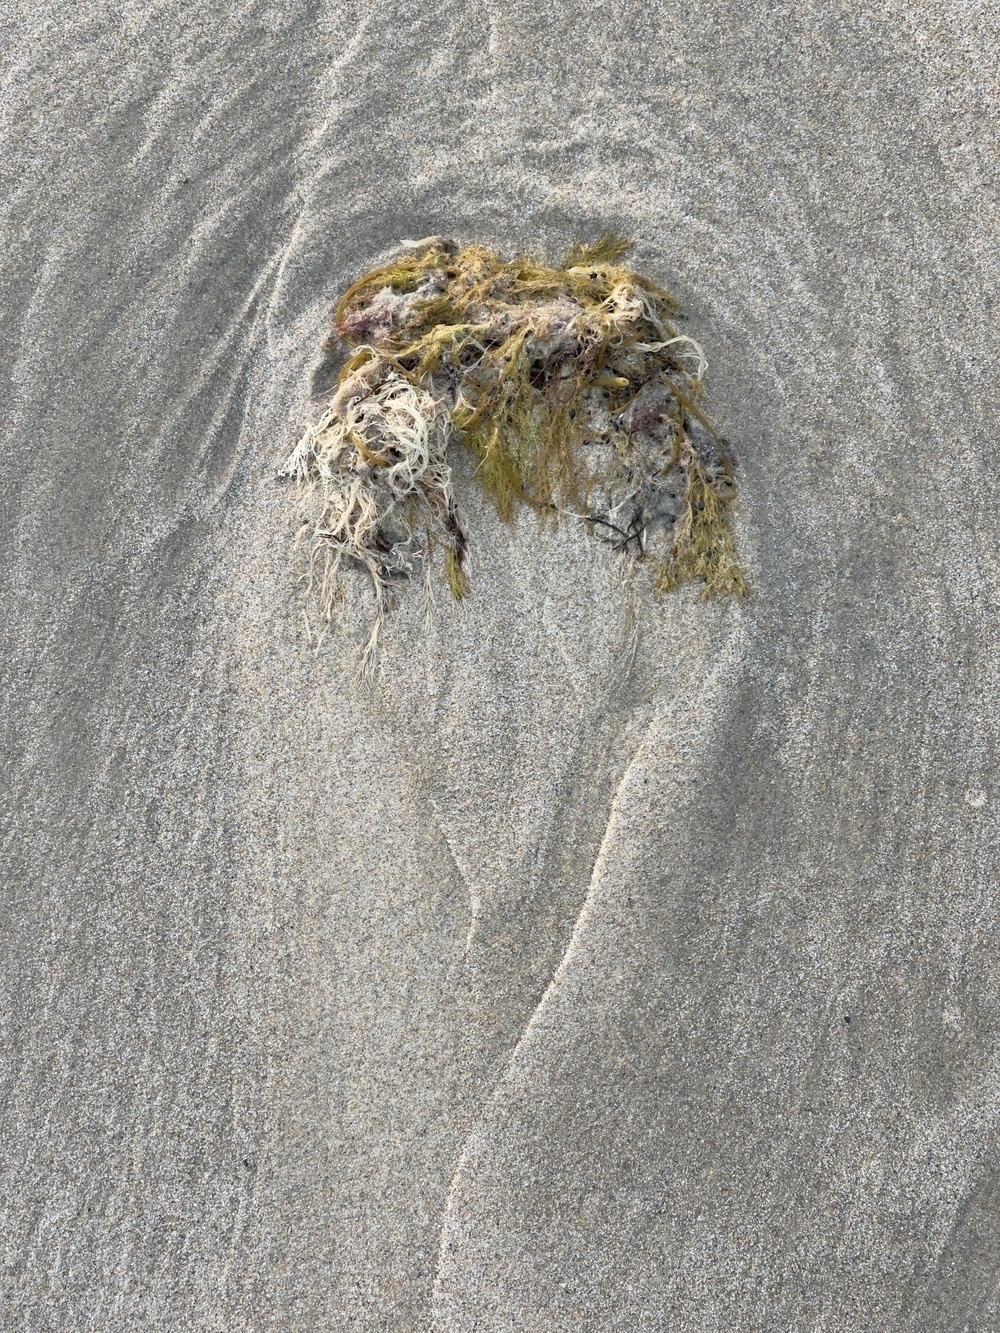 Seaweed partially buried in sand with water erosion pattern around it.